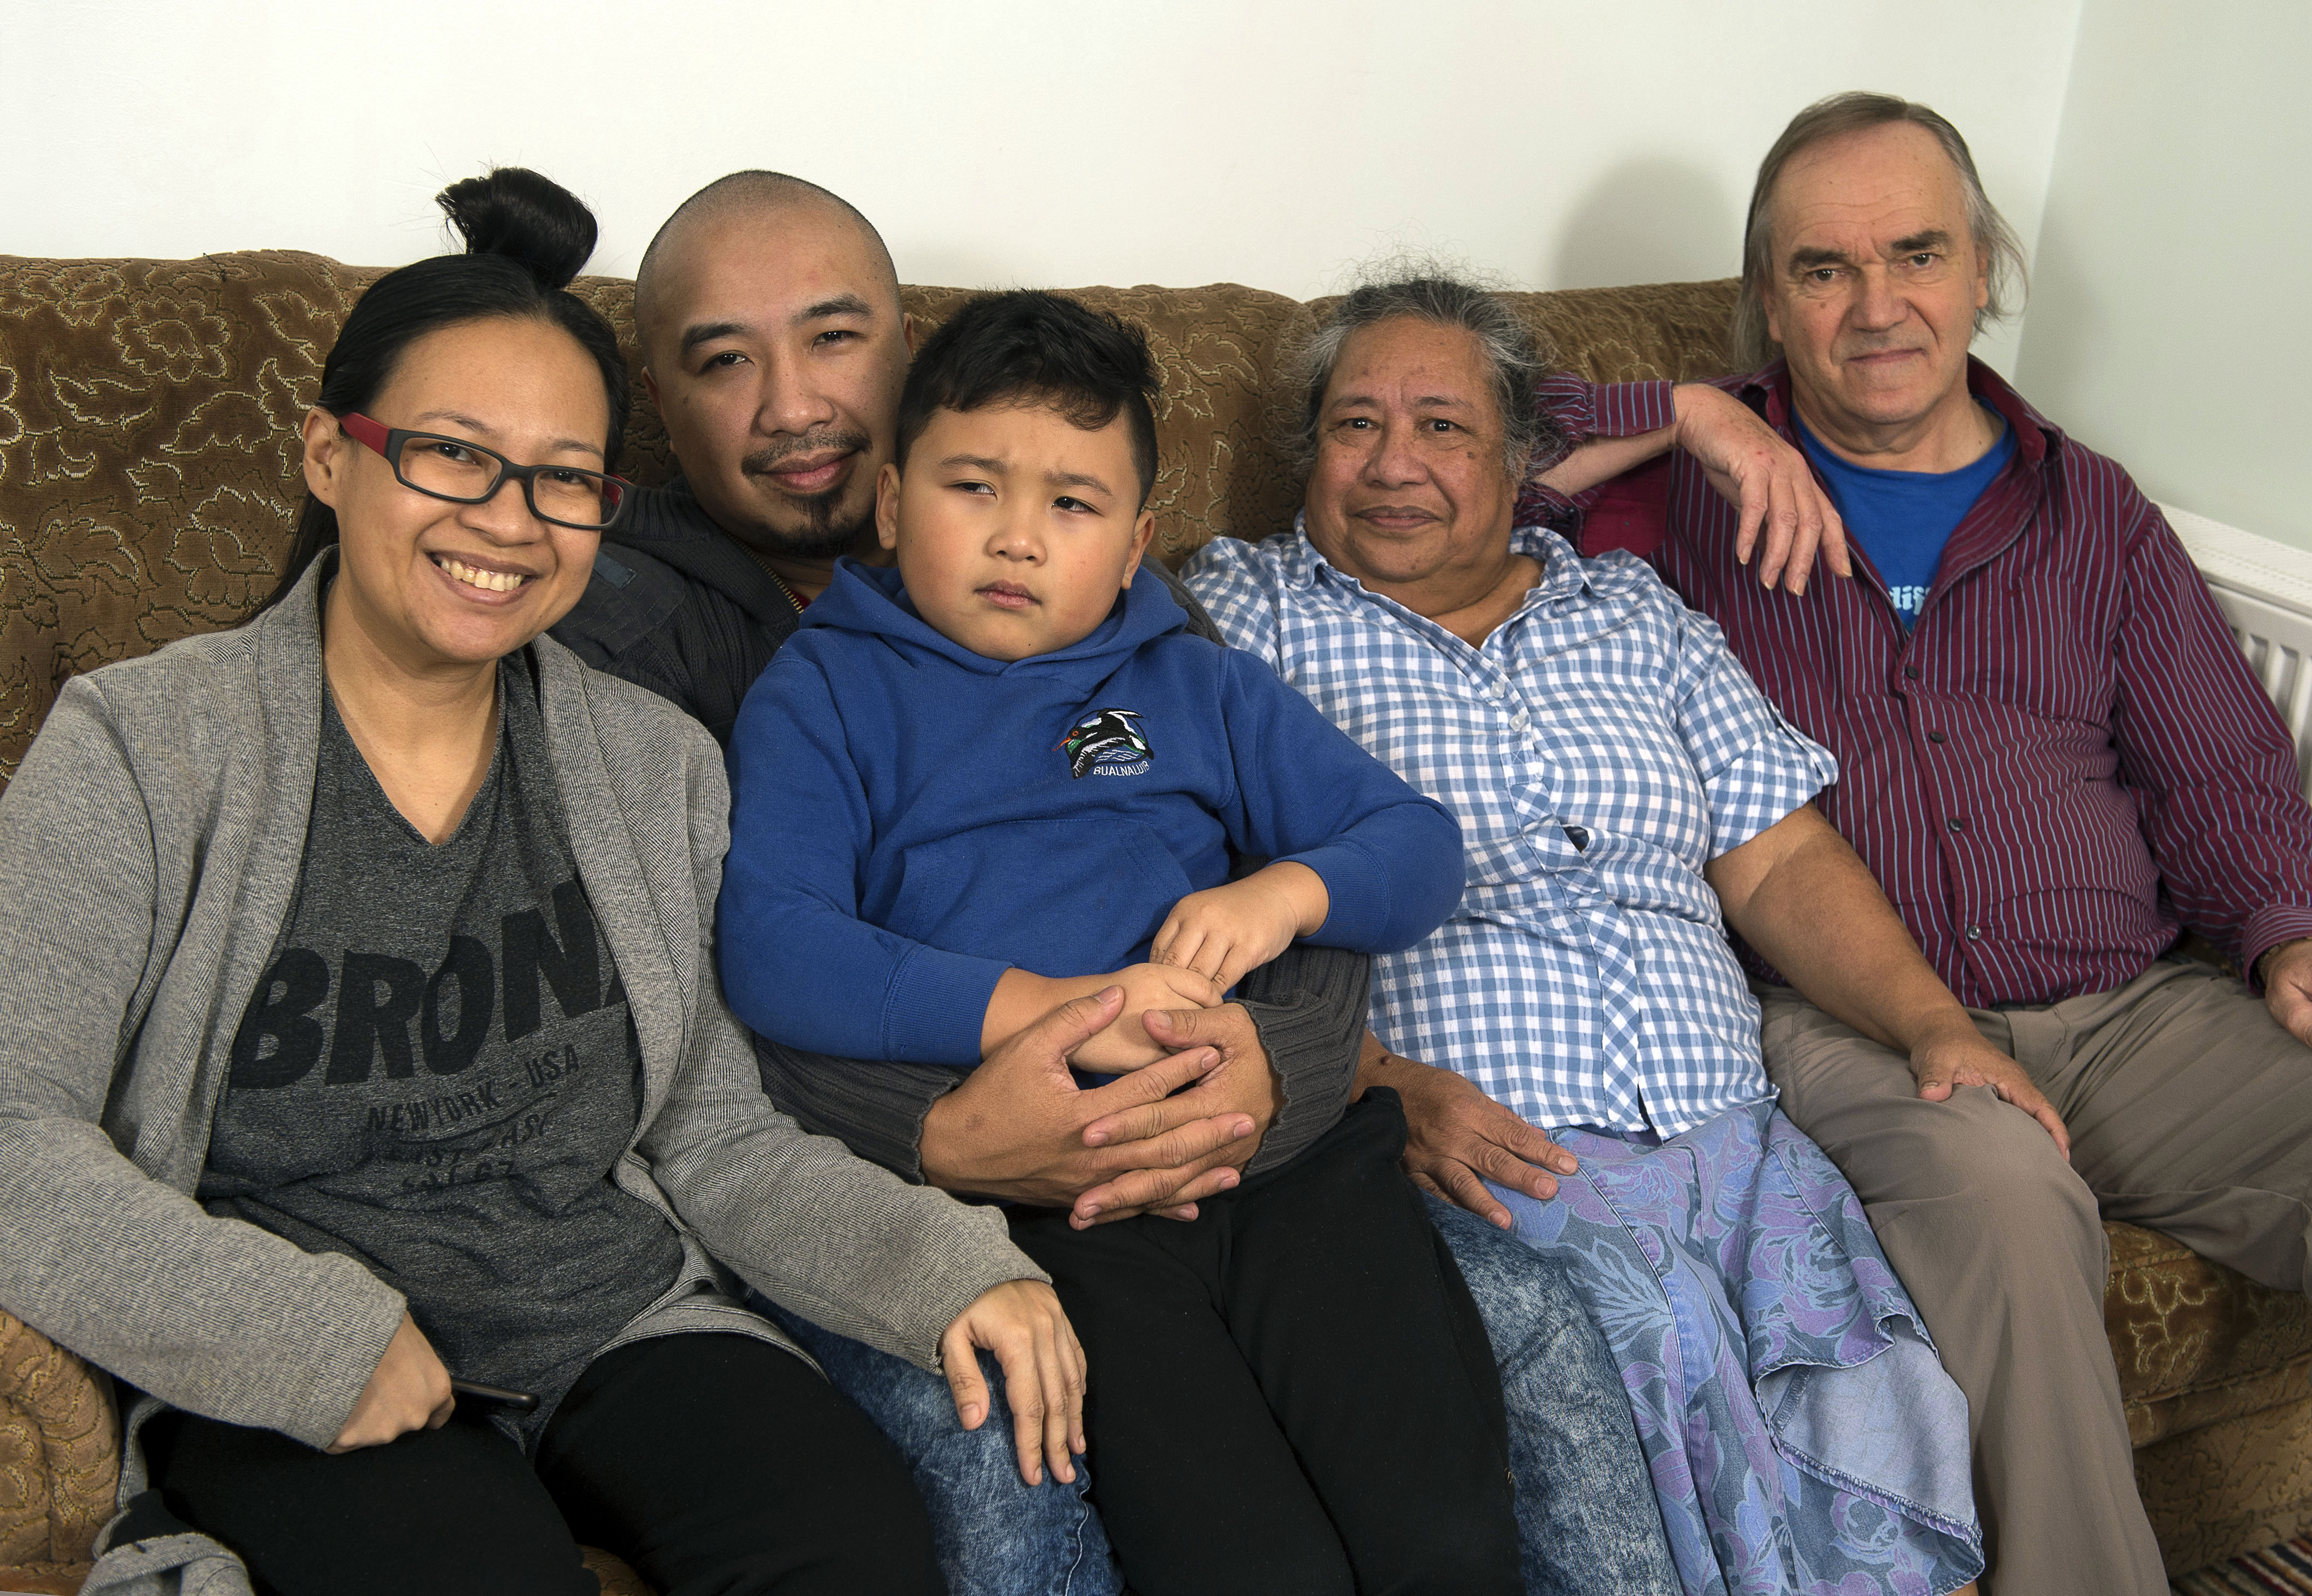 David Wilson and his wife Tess with Filipino daughter Palm husband Rolly, with their son Neric from Aultbea Wester Ross.
(Trevor Martin).